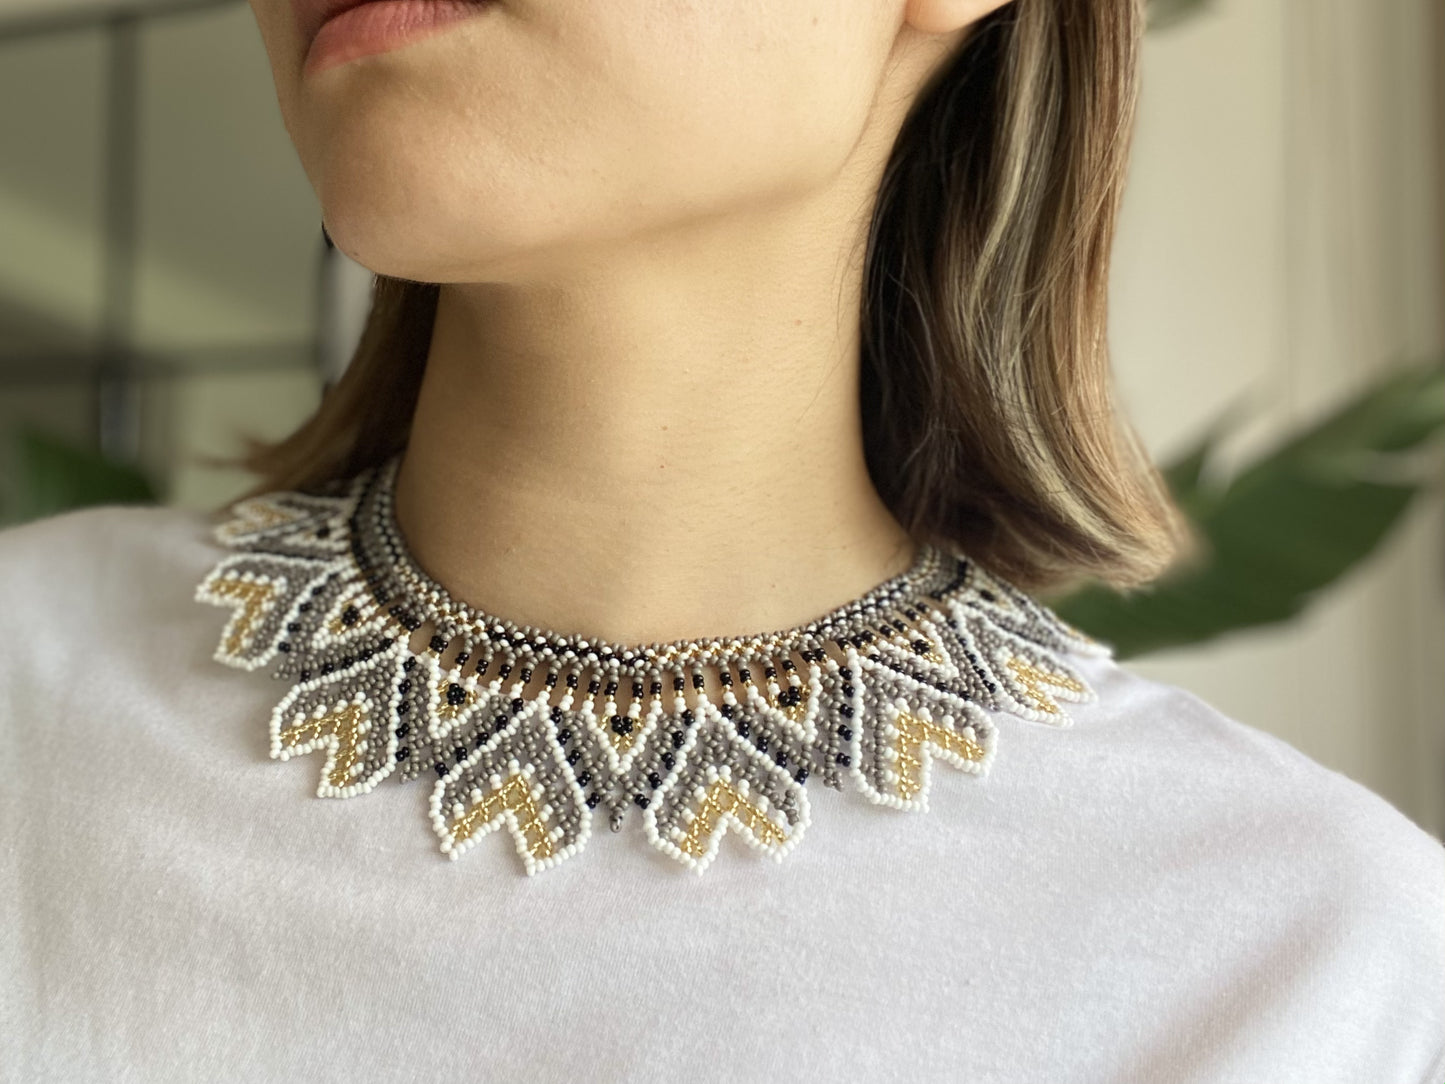 Enlace Beads Collar Necklace / Amour